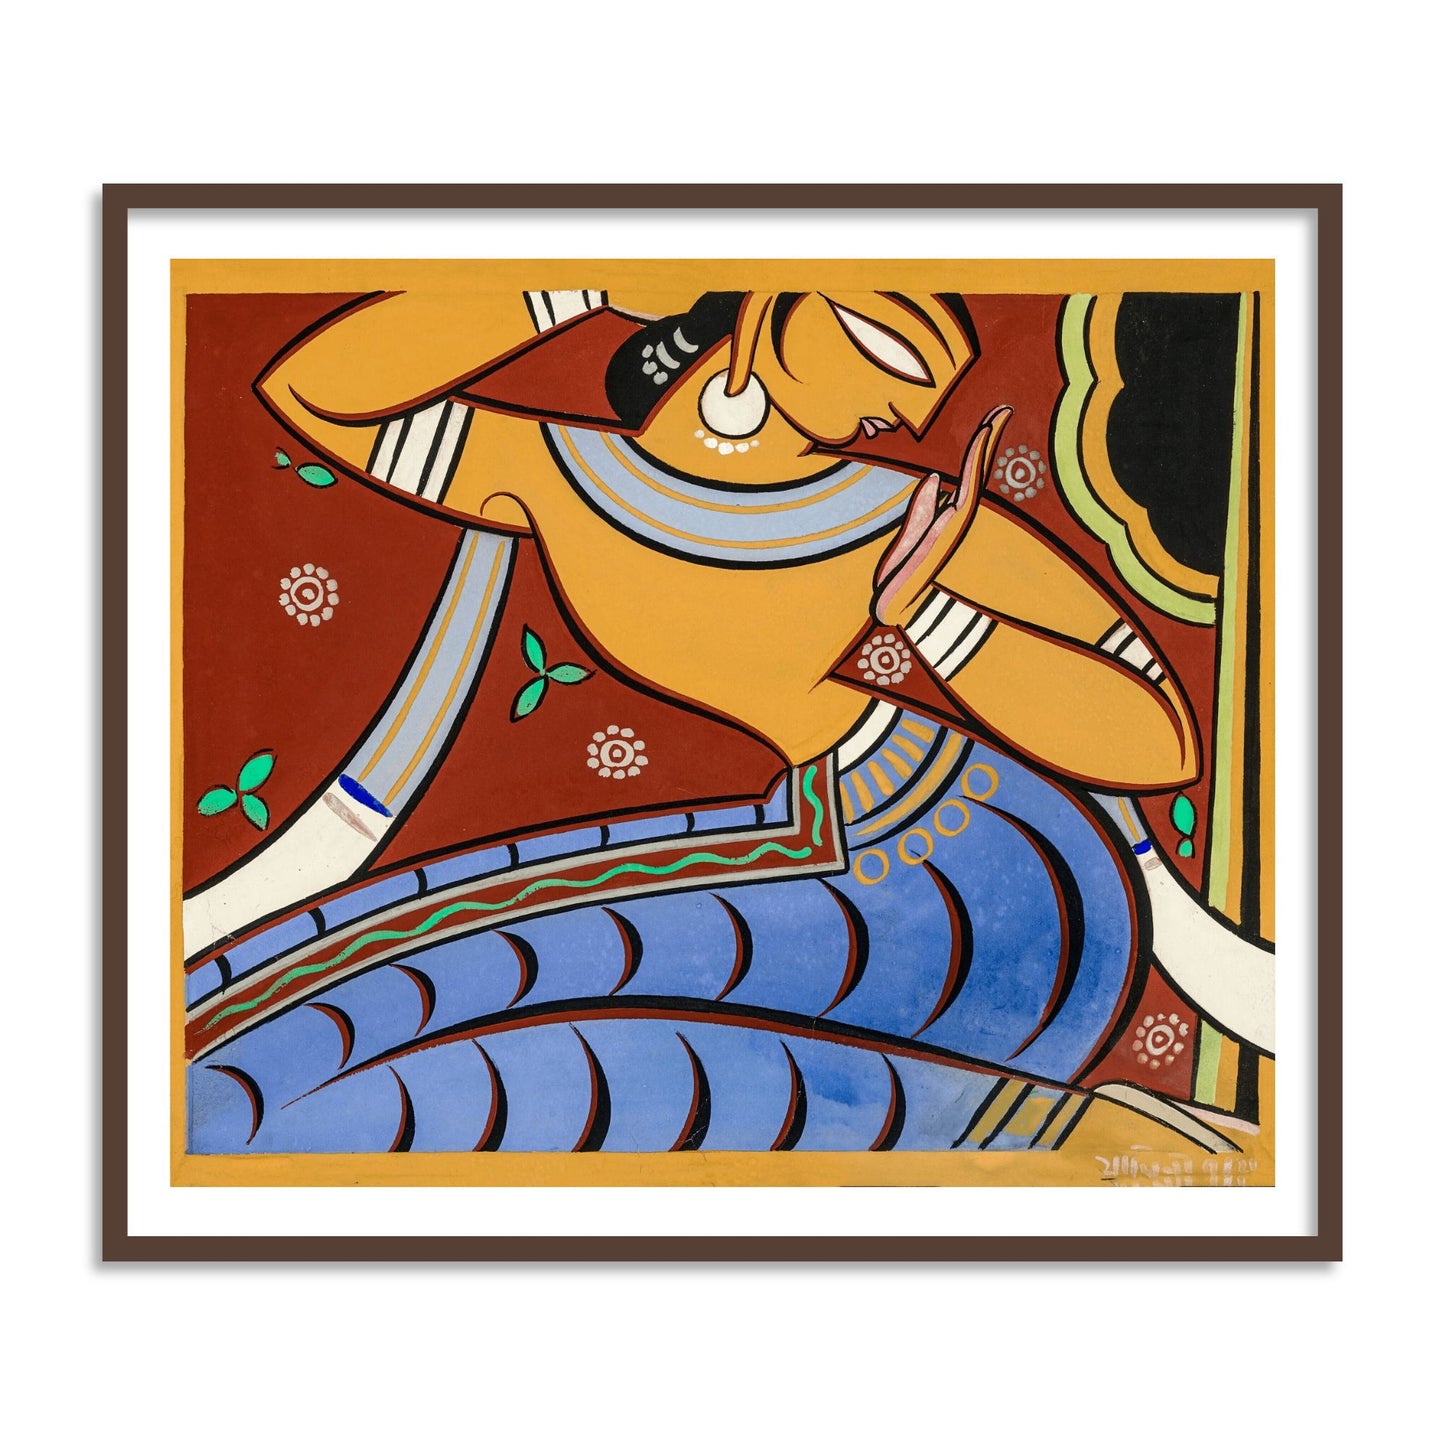 Gopini Wall Art Painting Print by Jamini Roy for Home Decor